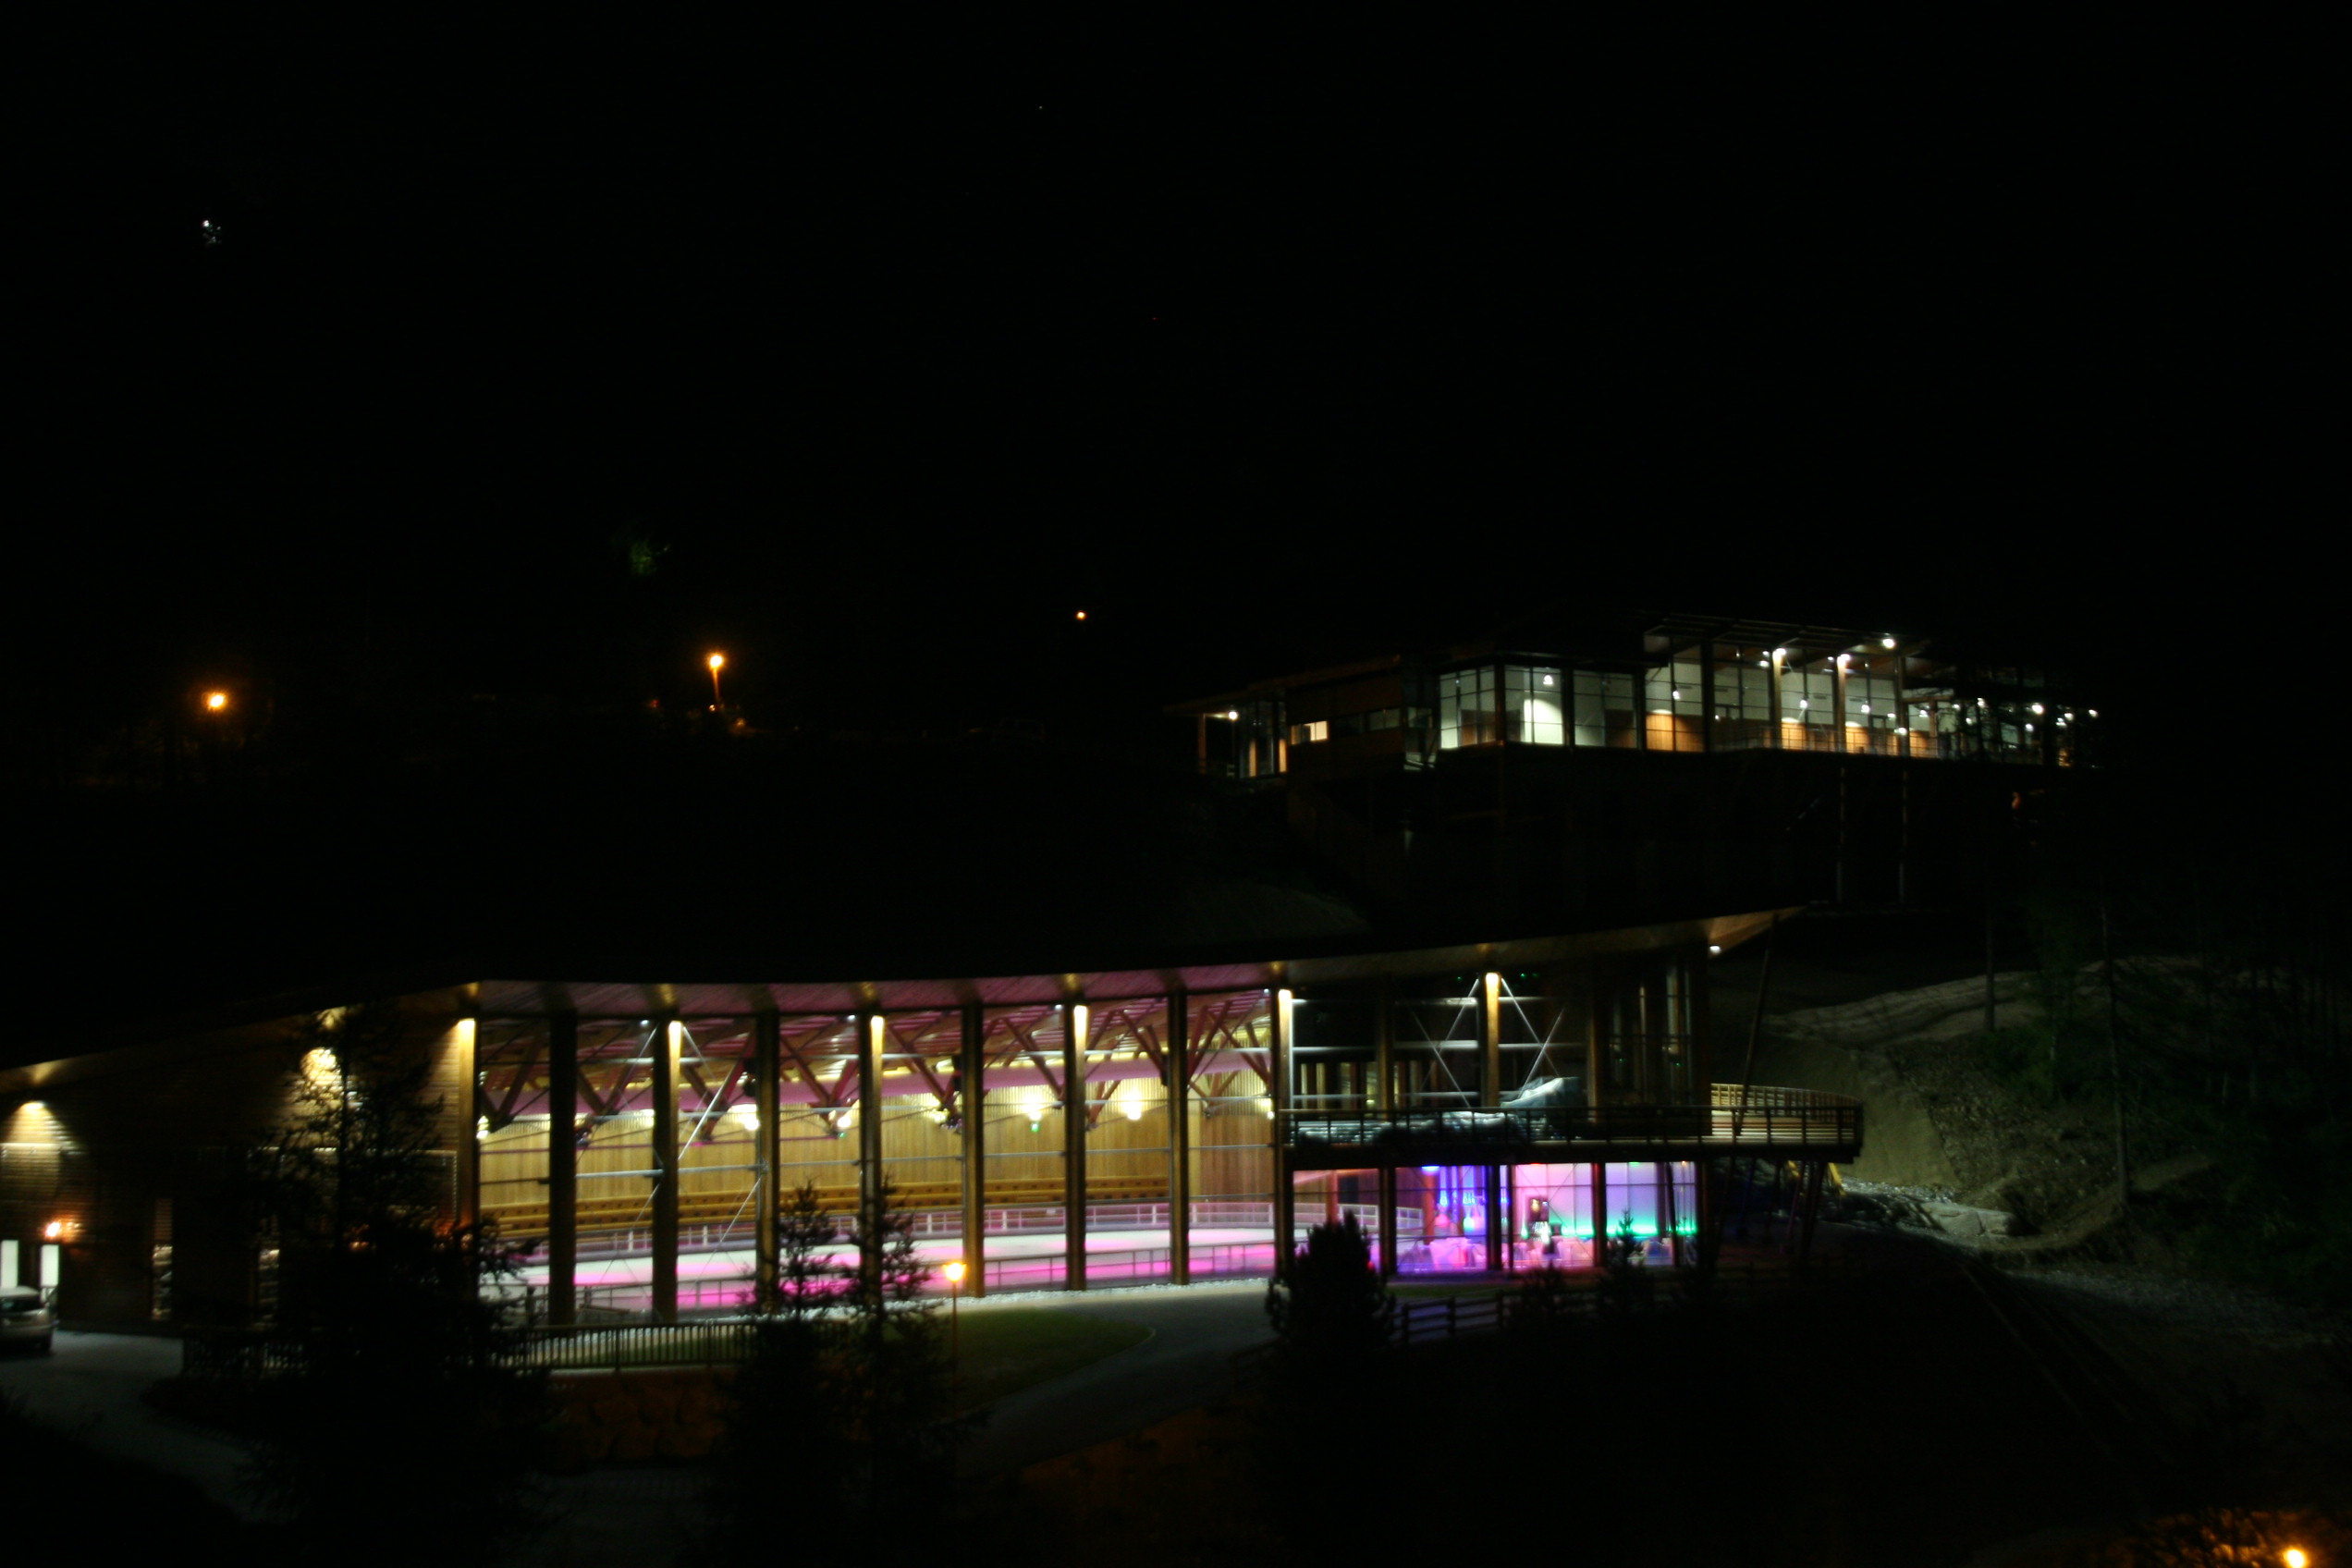 Patinoire by night